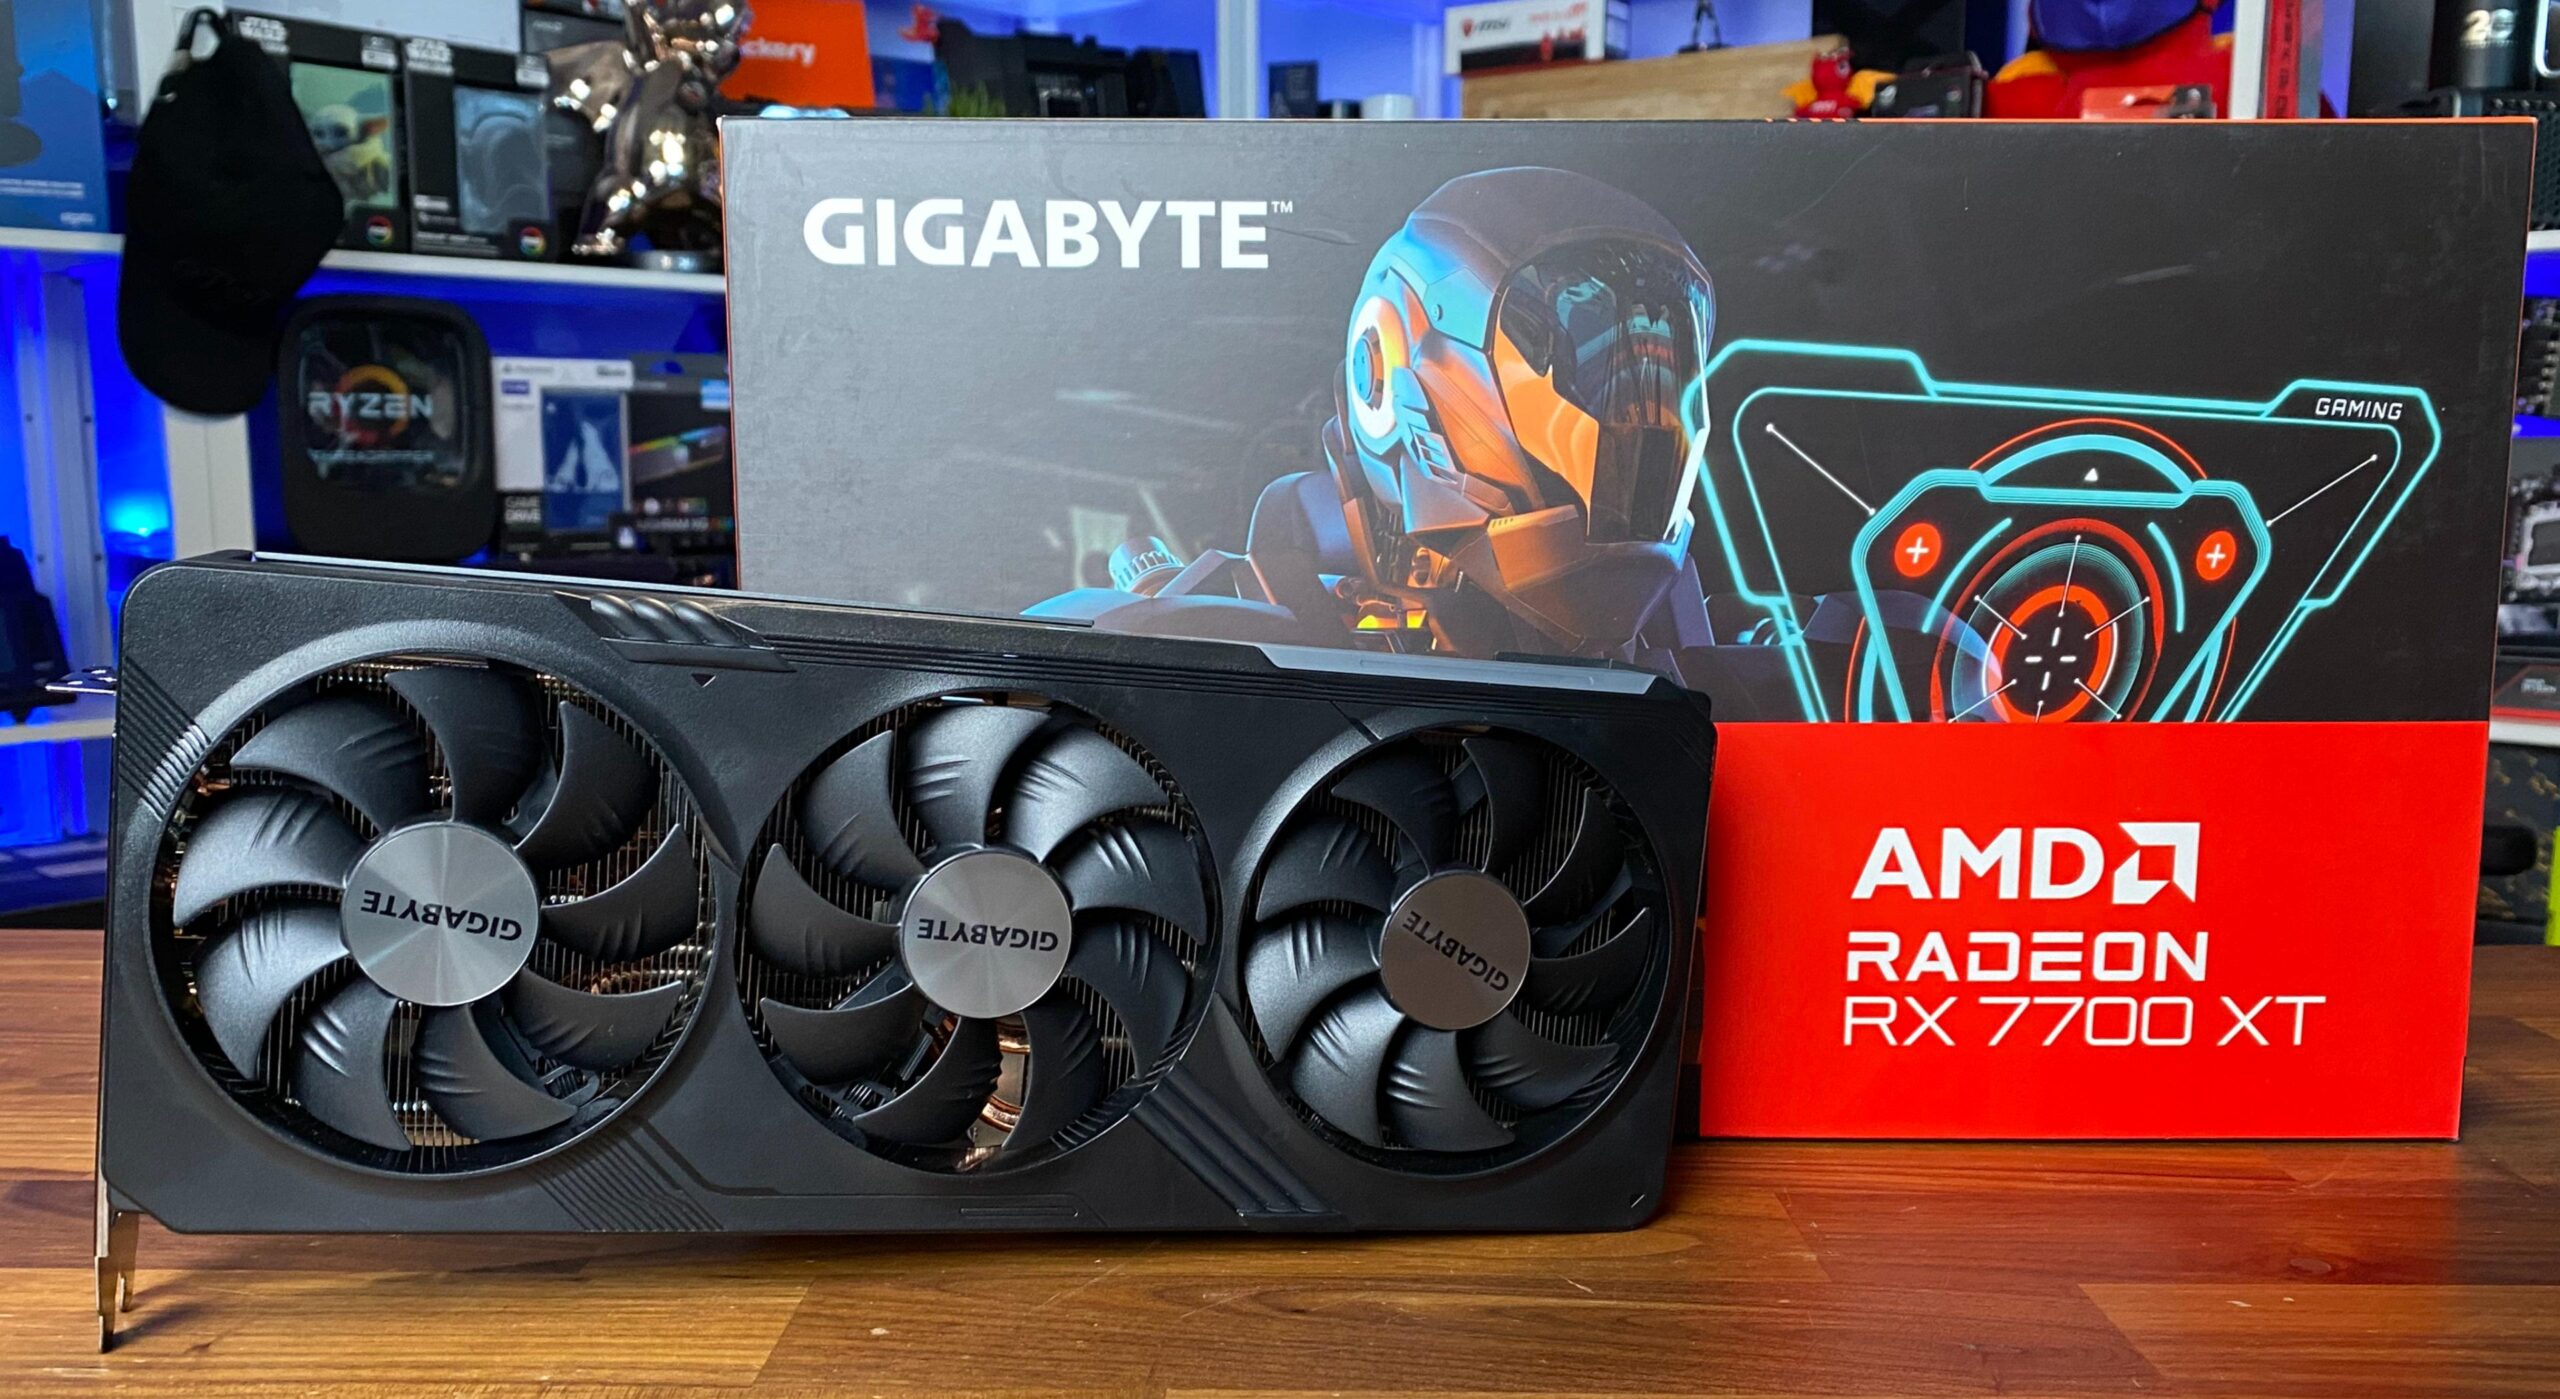 AMD Radeon RX 7700 XT specs, release date, and latest news